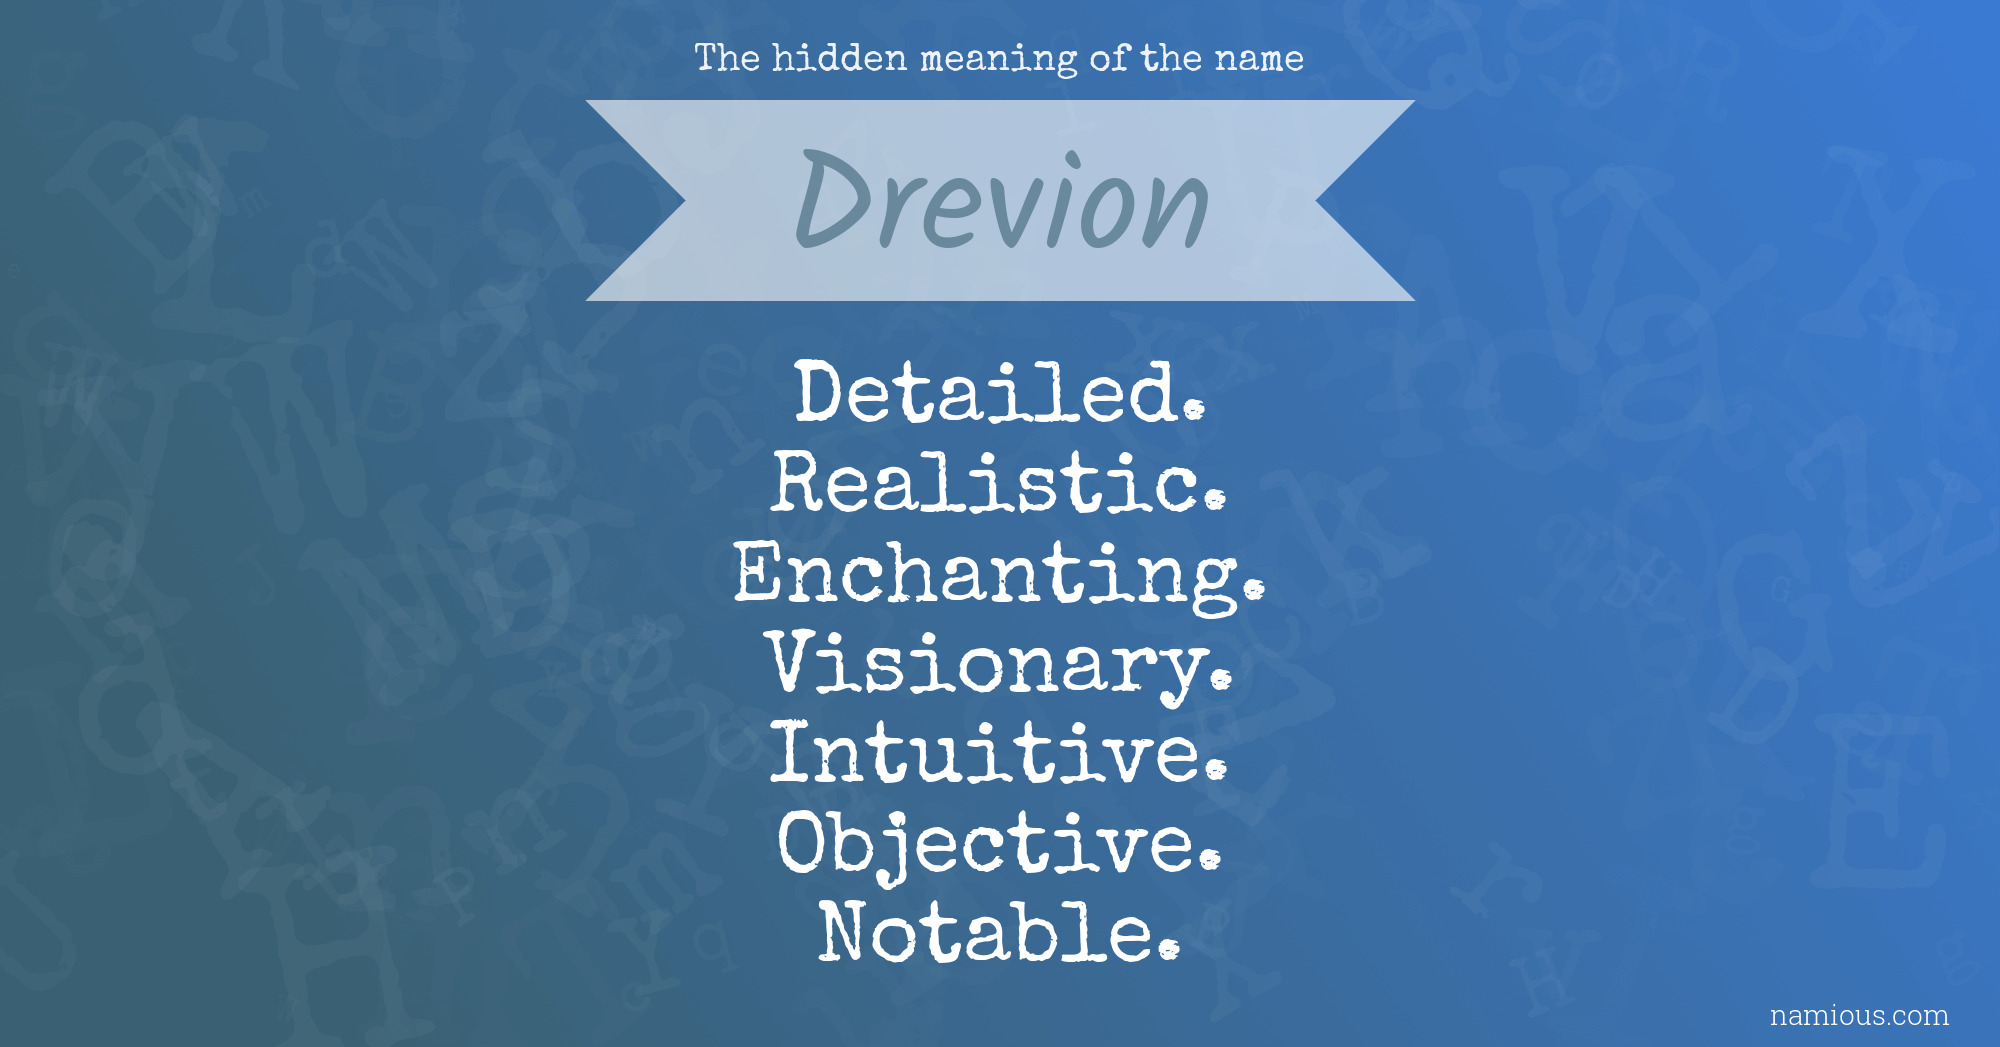 The hidden meaning of the name Drevion